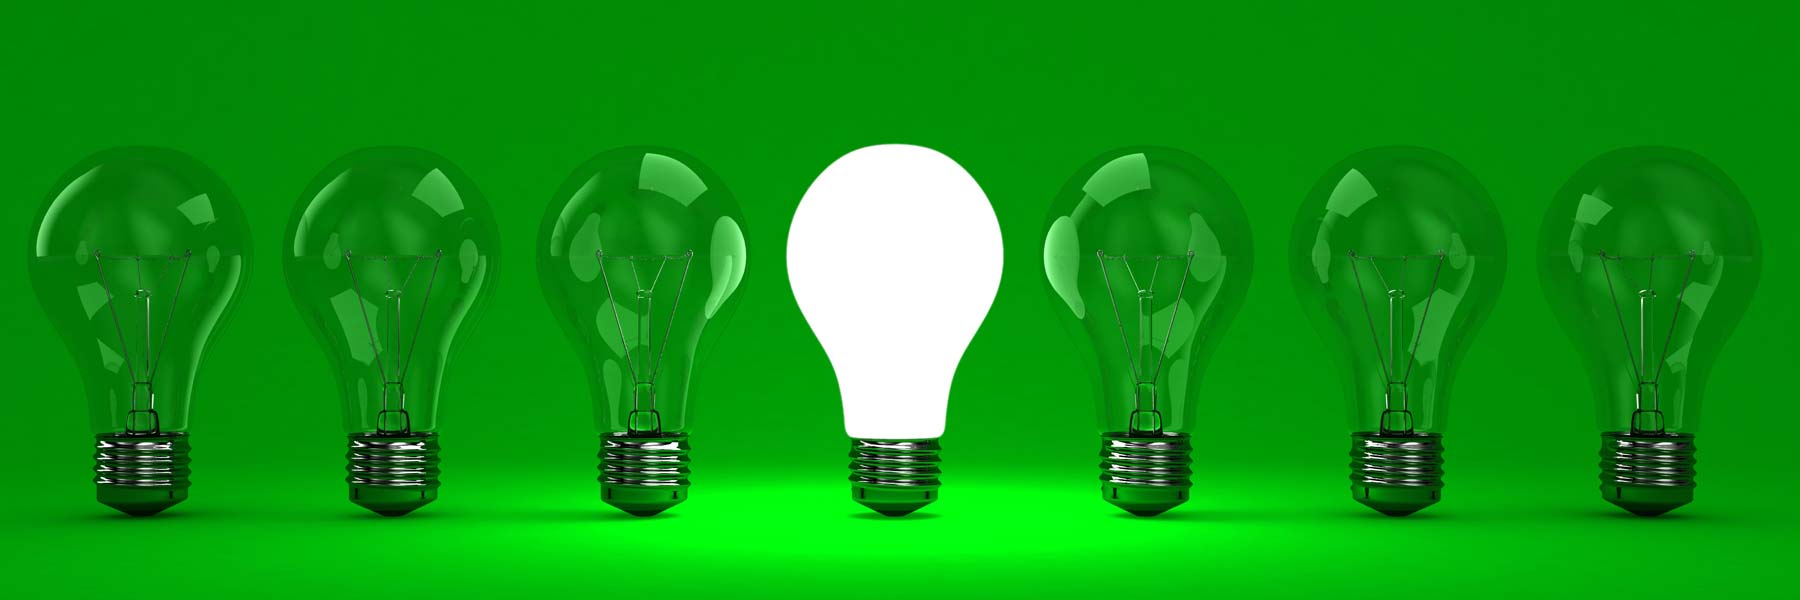 6 green lightbulbs and one white lightbulb in the middle, all on a green background